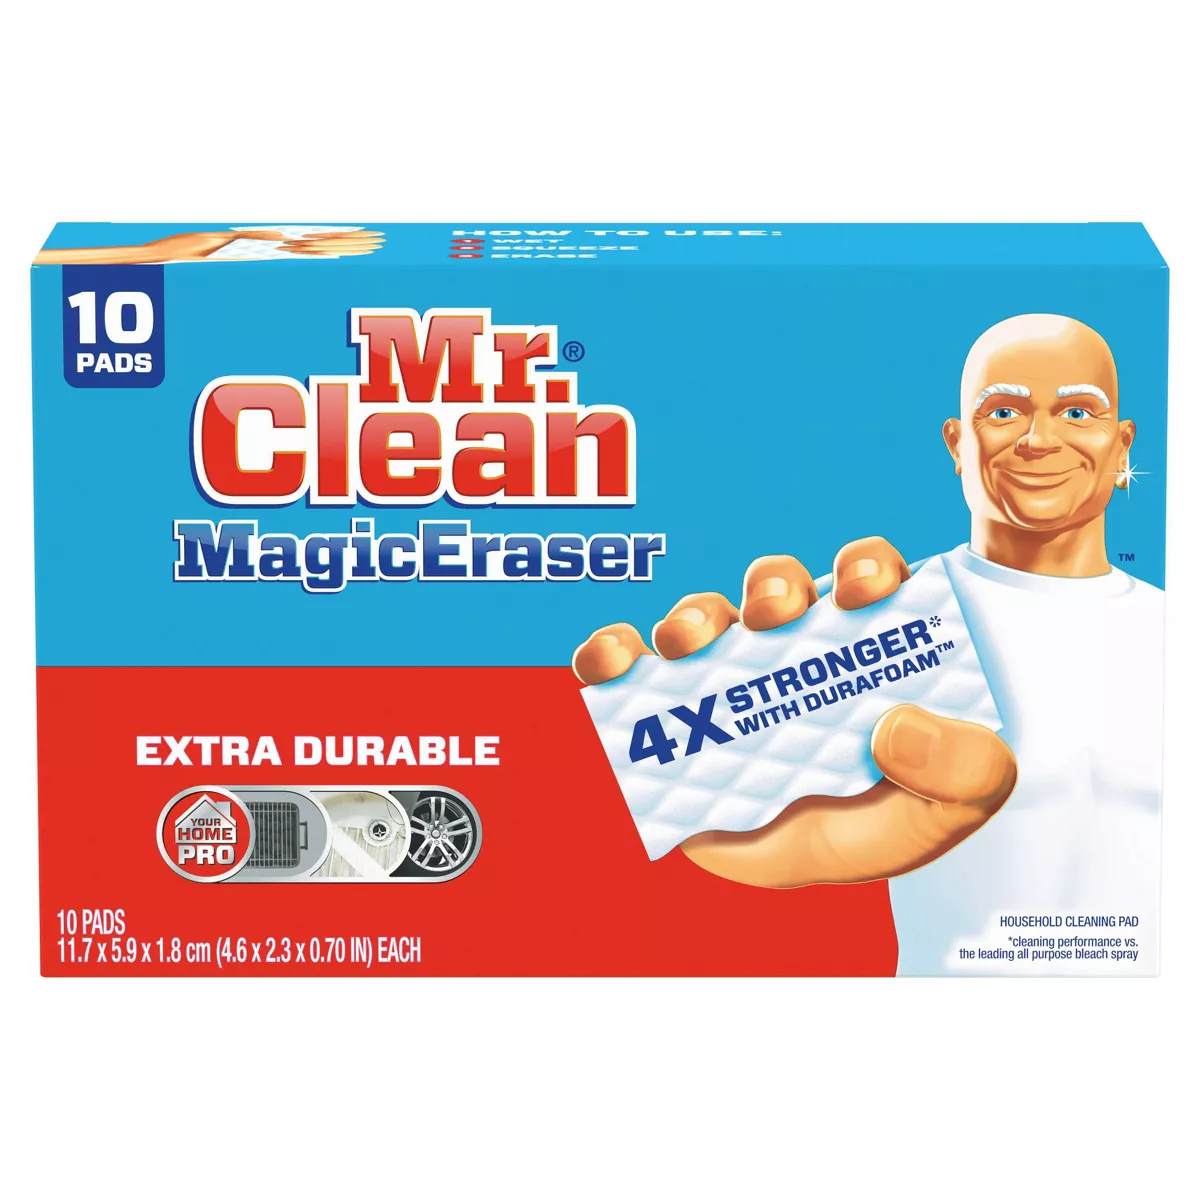 Honorable Mention: Mr. Clean Magic Eraser